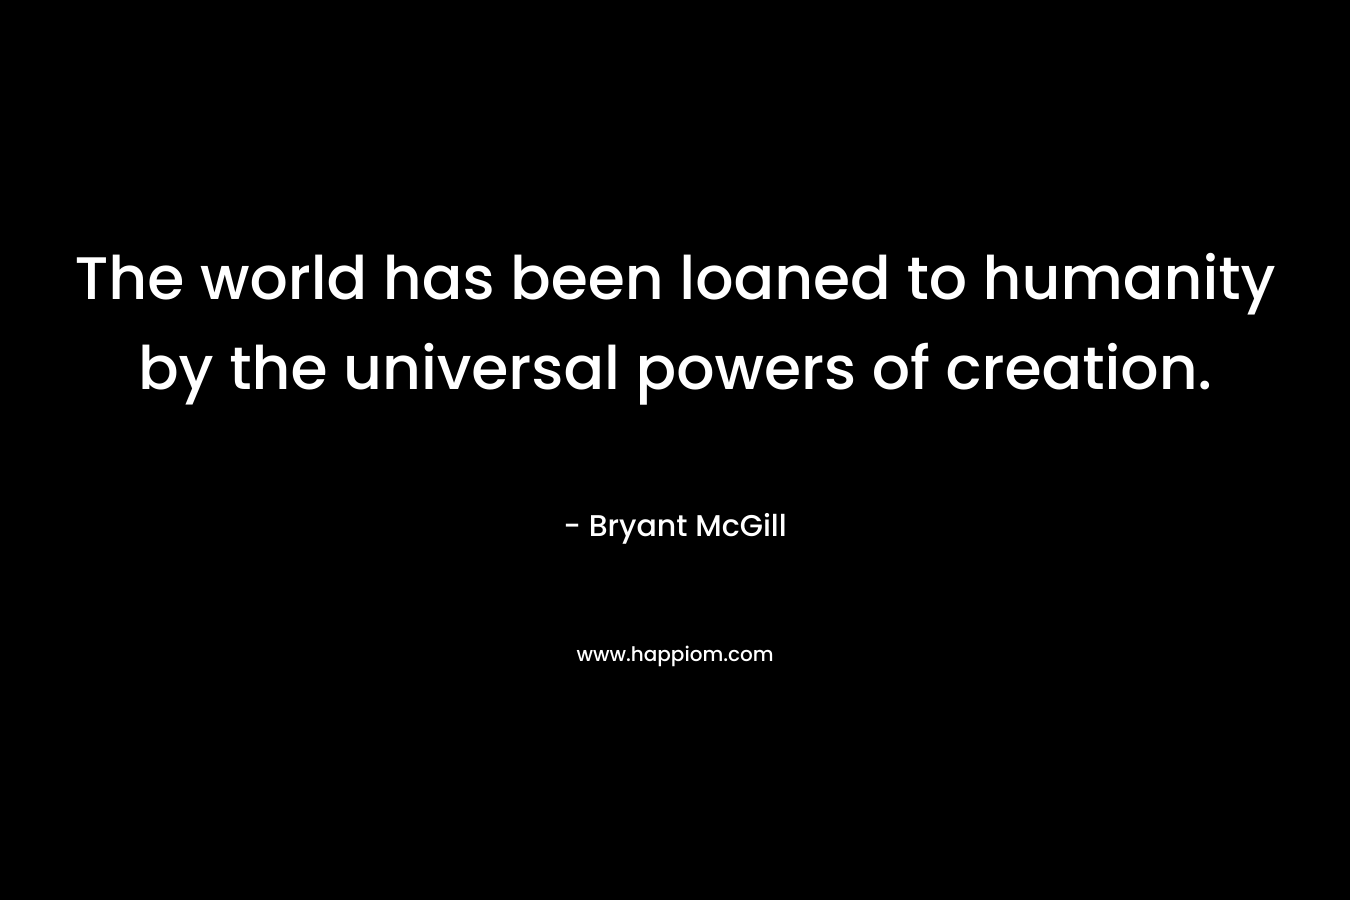 The world has been loaned to humanity by the universal powers of creation.